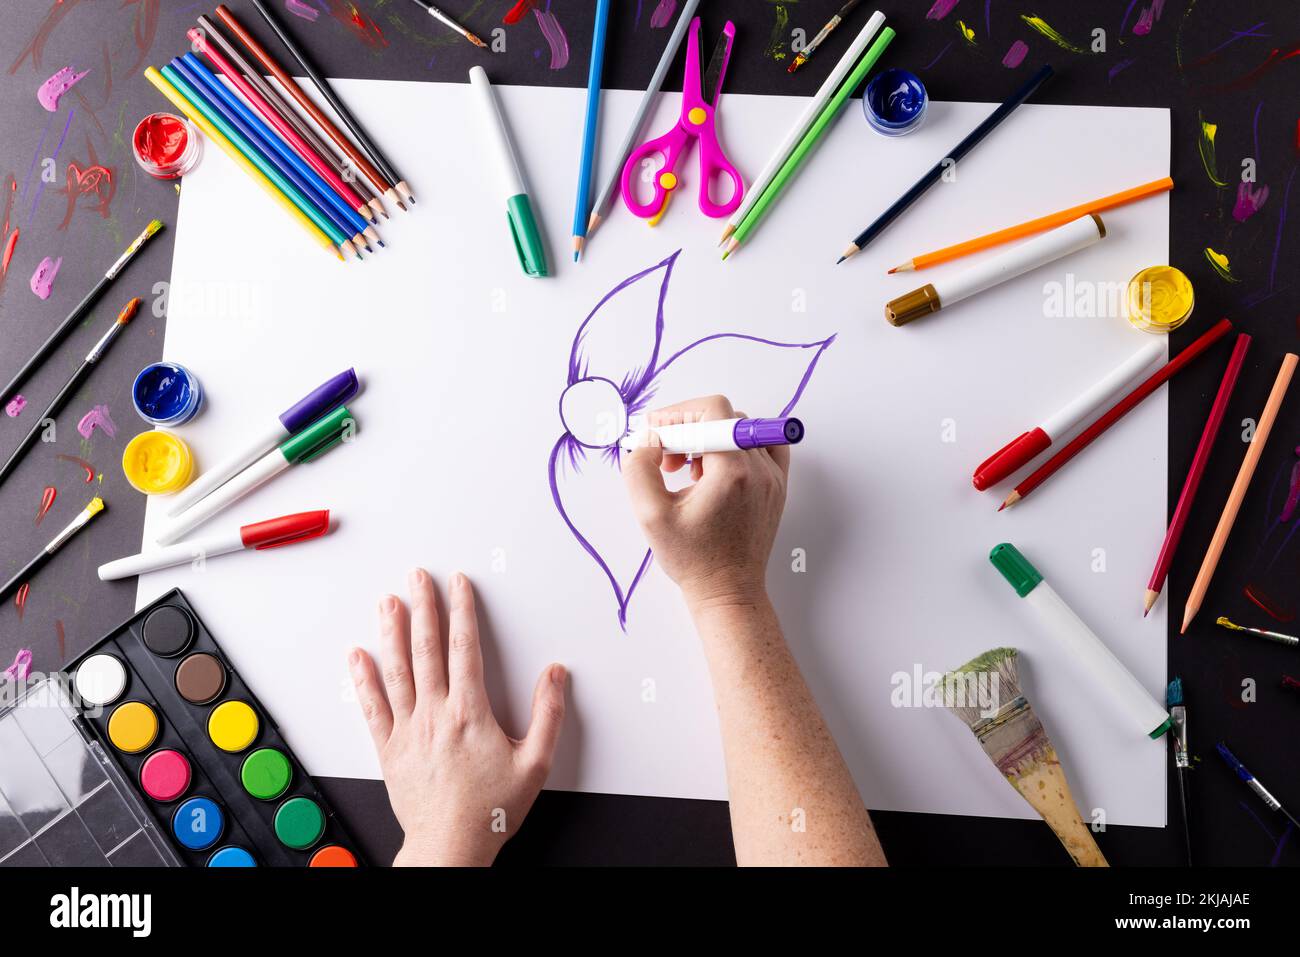 Overhead of hands drawing purple flower on paper, with art materials on table top Stock Photo